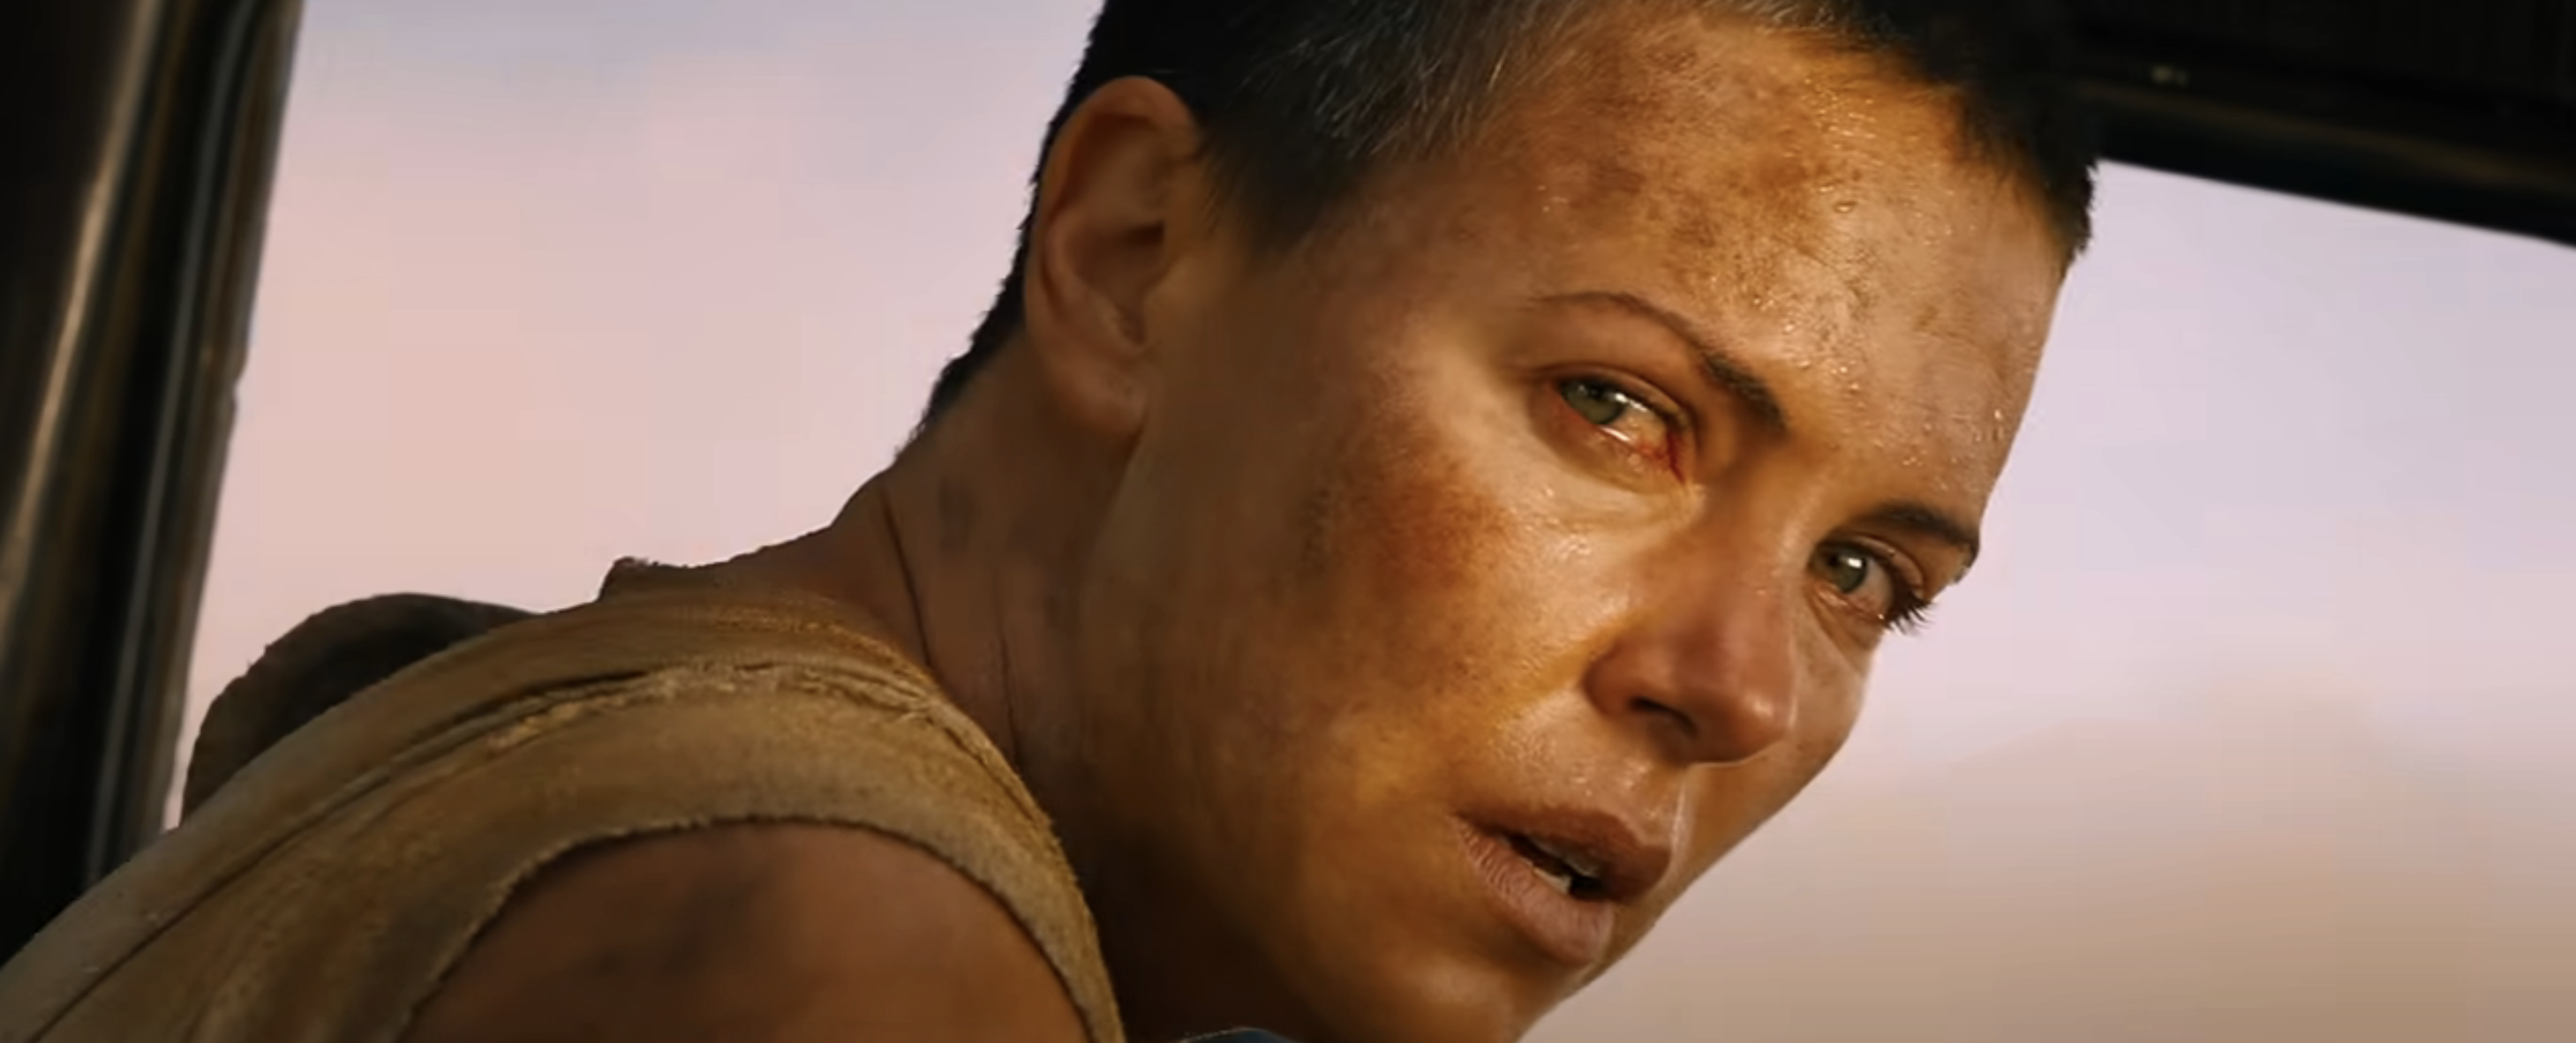 Furiosa, a character from Mad Max, looks intently through a vehicle&#x27;s window